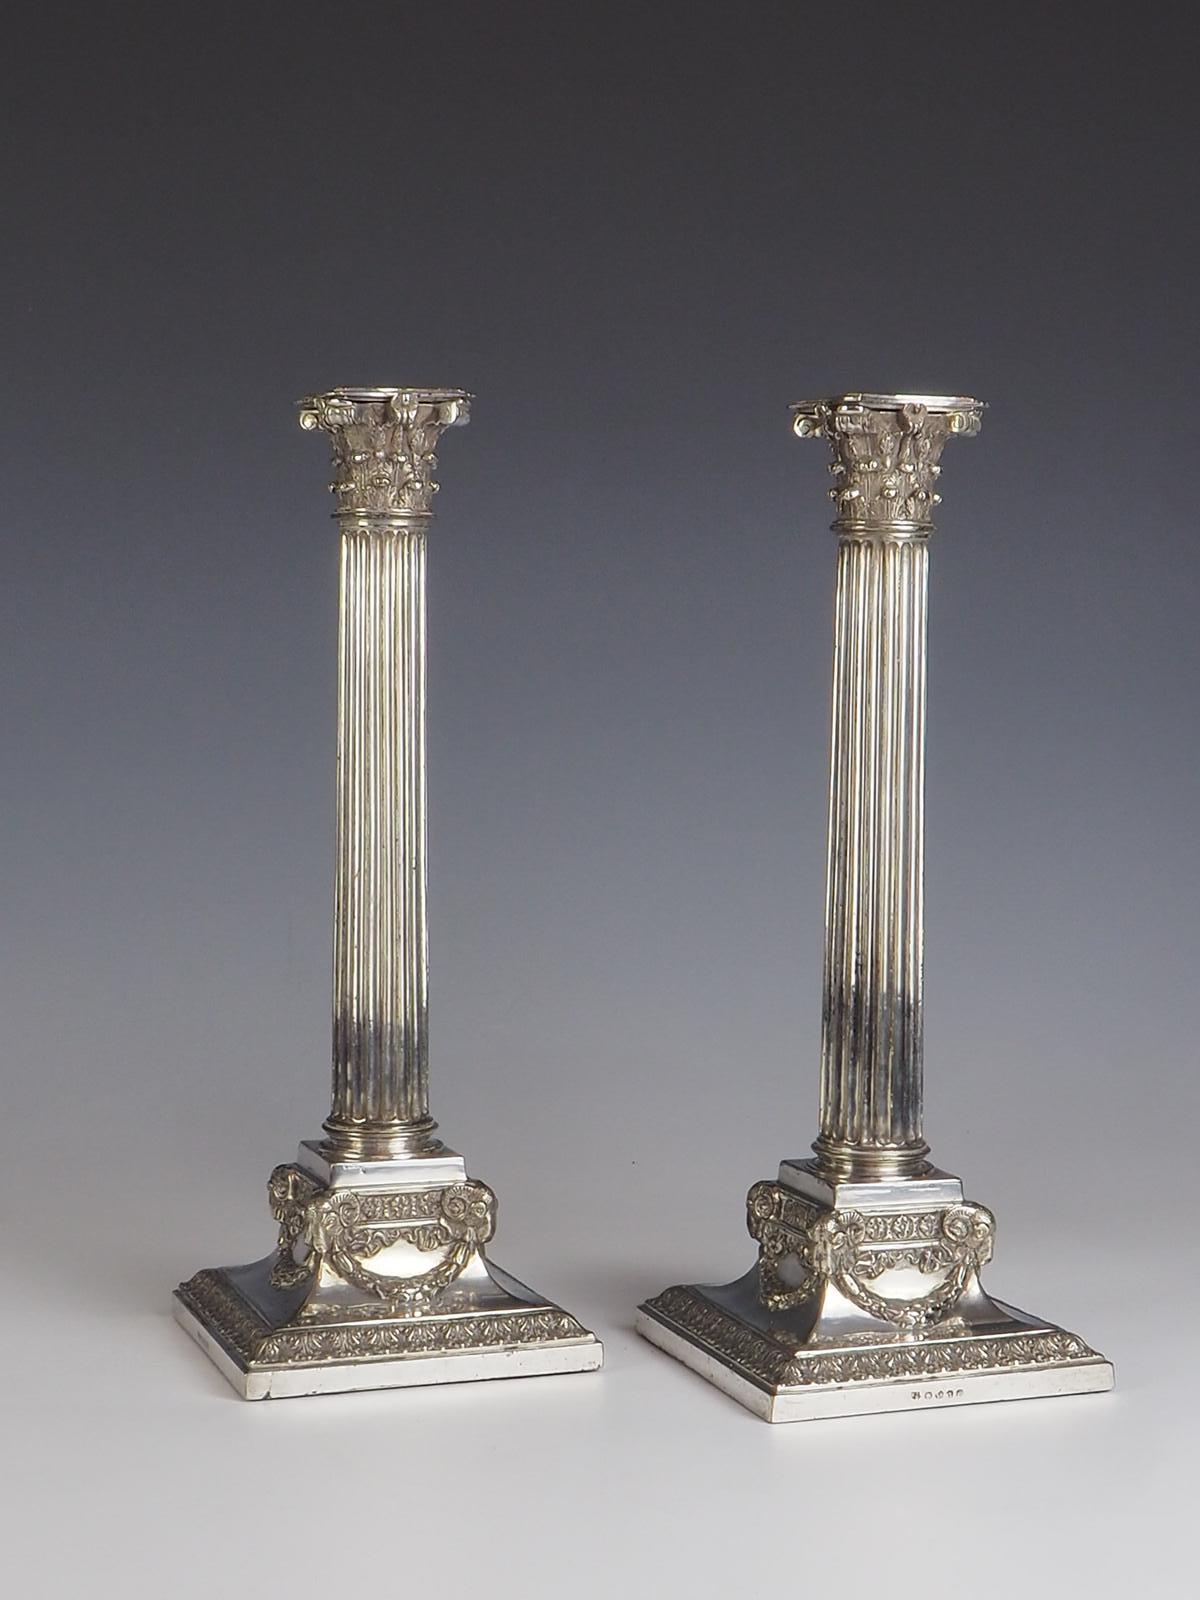 Indulge in the timeless elegance of this exquisite pair of Martin Hall & Co Silver Plate Candlesticks, crafted circa 1890. These candlesticks are a testament to the impeccable craftsmanship of the era, boasting intricate detailing that will